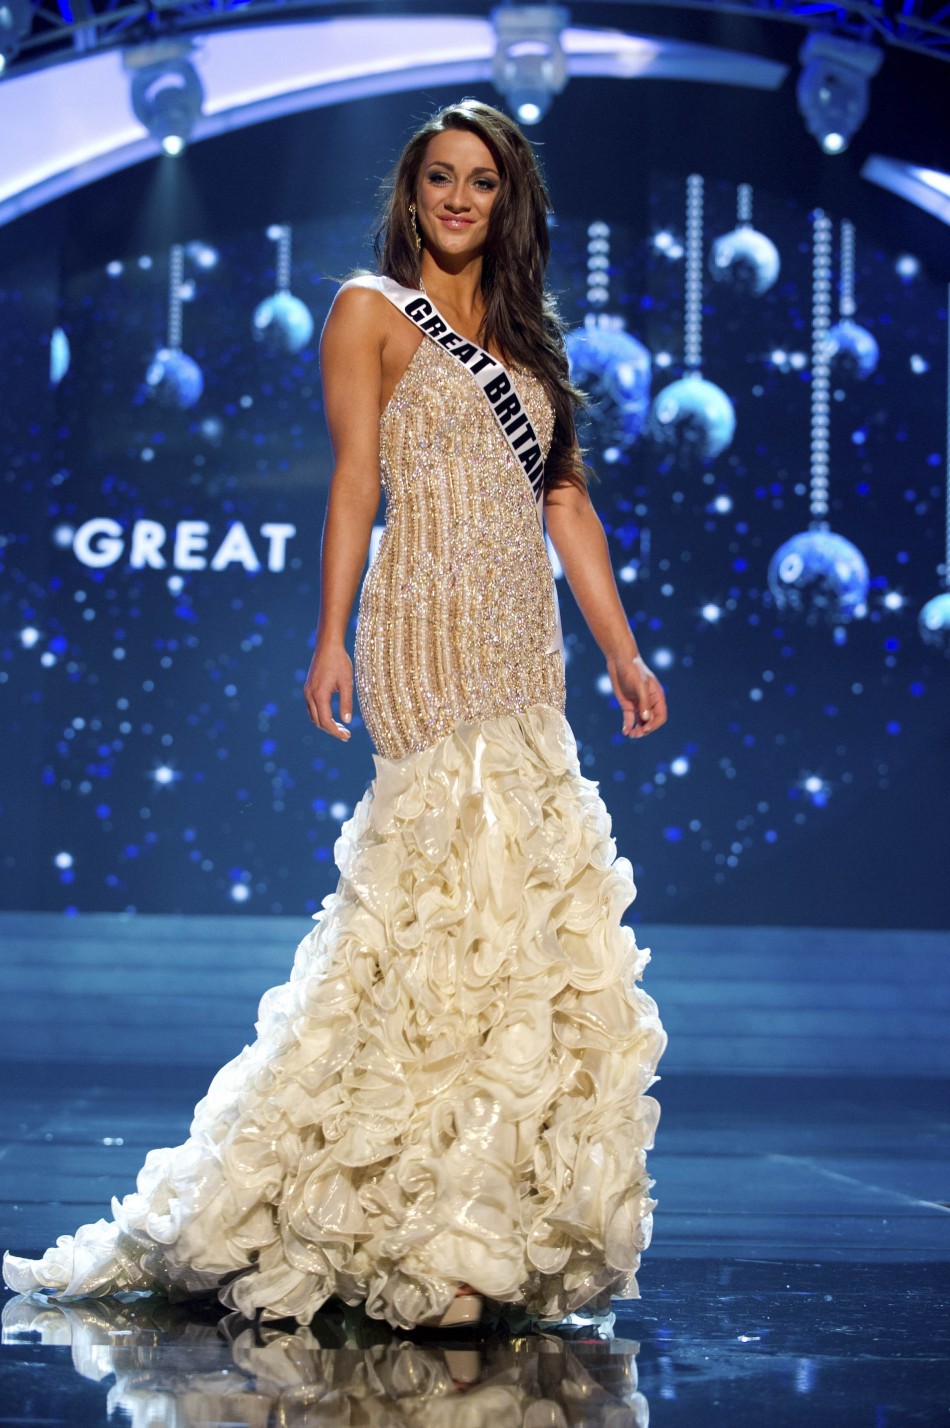 Miss Great Britain 2012 Hale competes in an evening gown of her choice during the Evening Gown Competition of the 2012 Miss Universe Presentation Show in Las Vegas